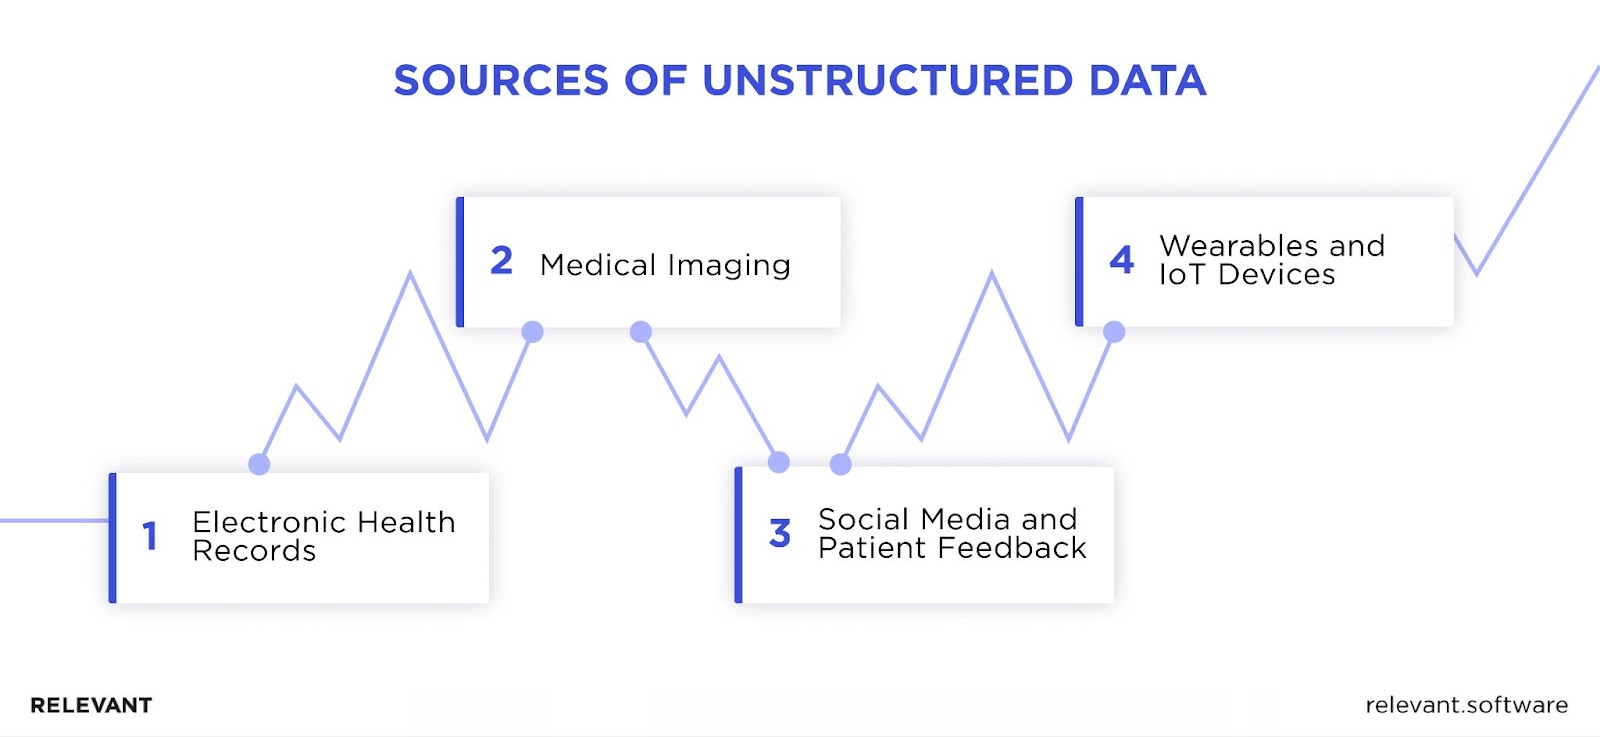 Sources of Unstructured Data in Healthcare